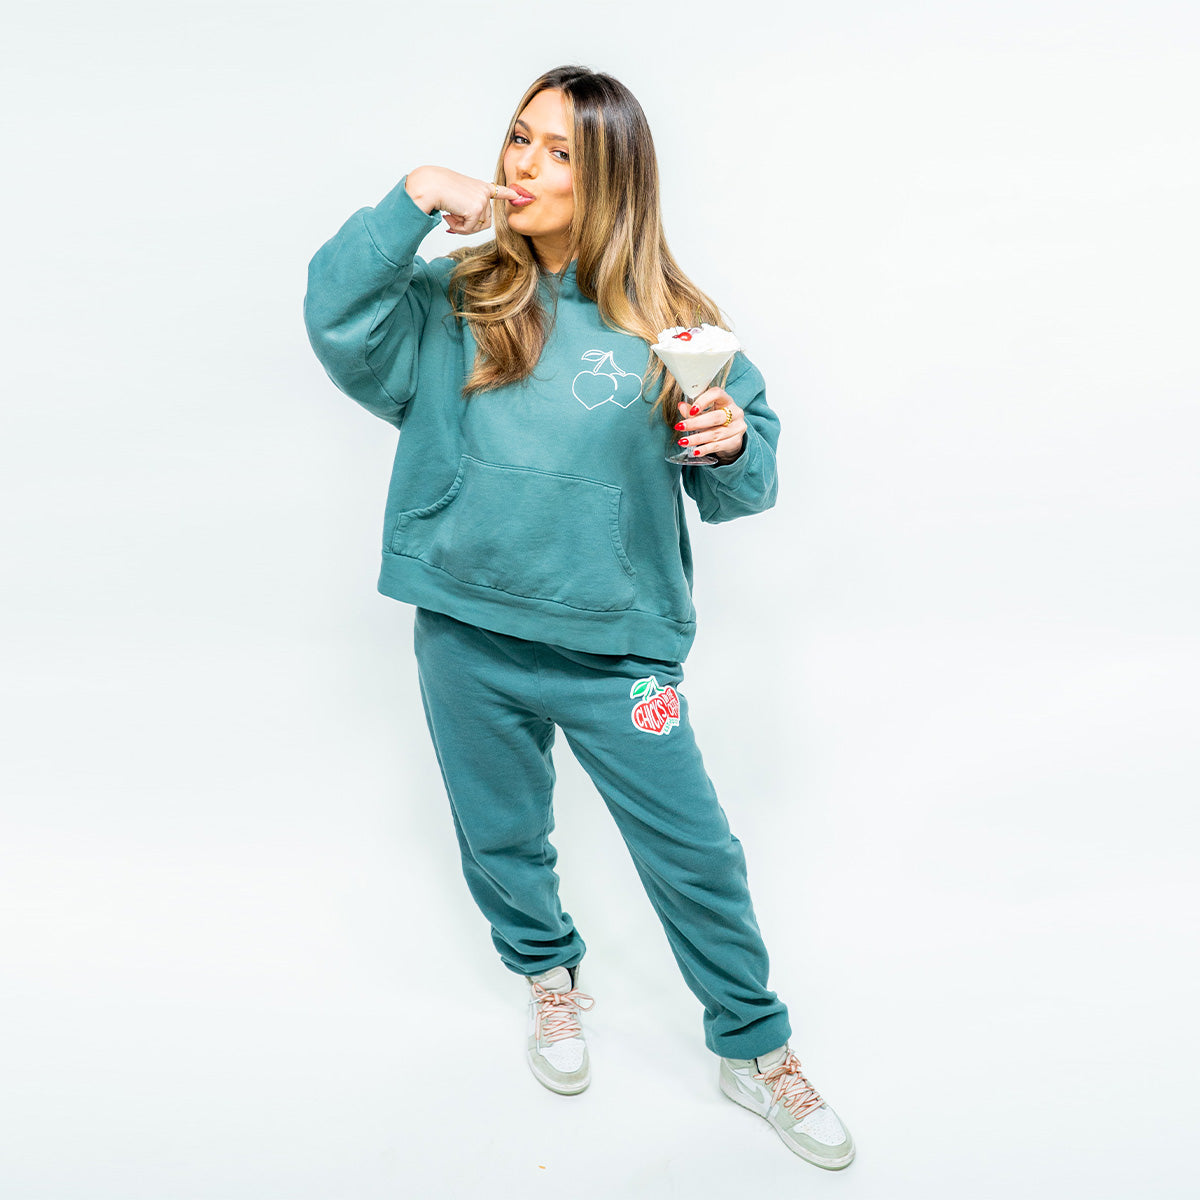 The Ria Cherry Sweatpants-Sweatpants-Chicks in the Office-Barstool Sports